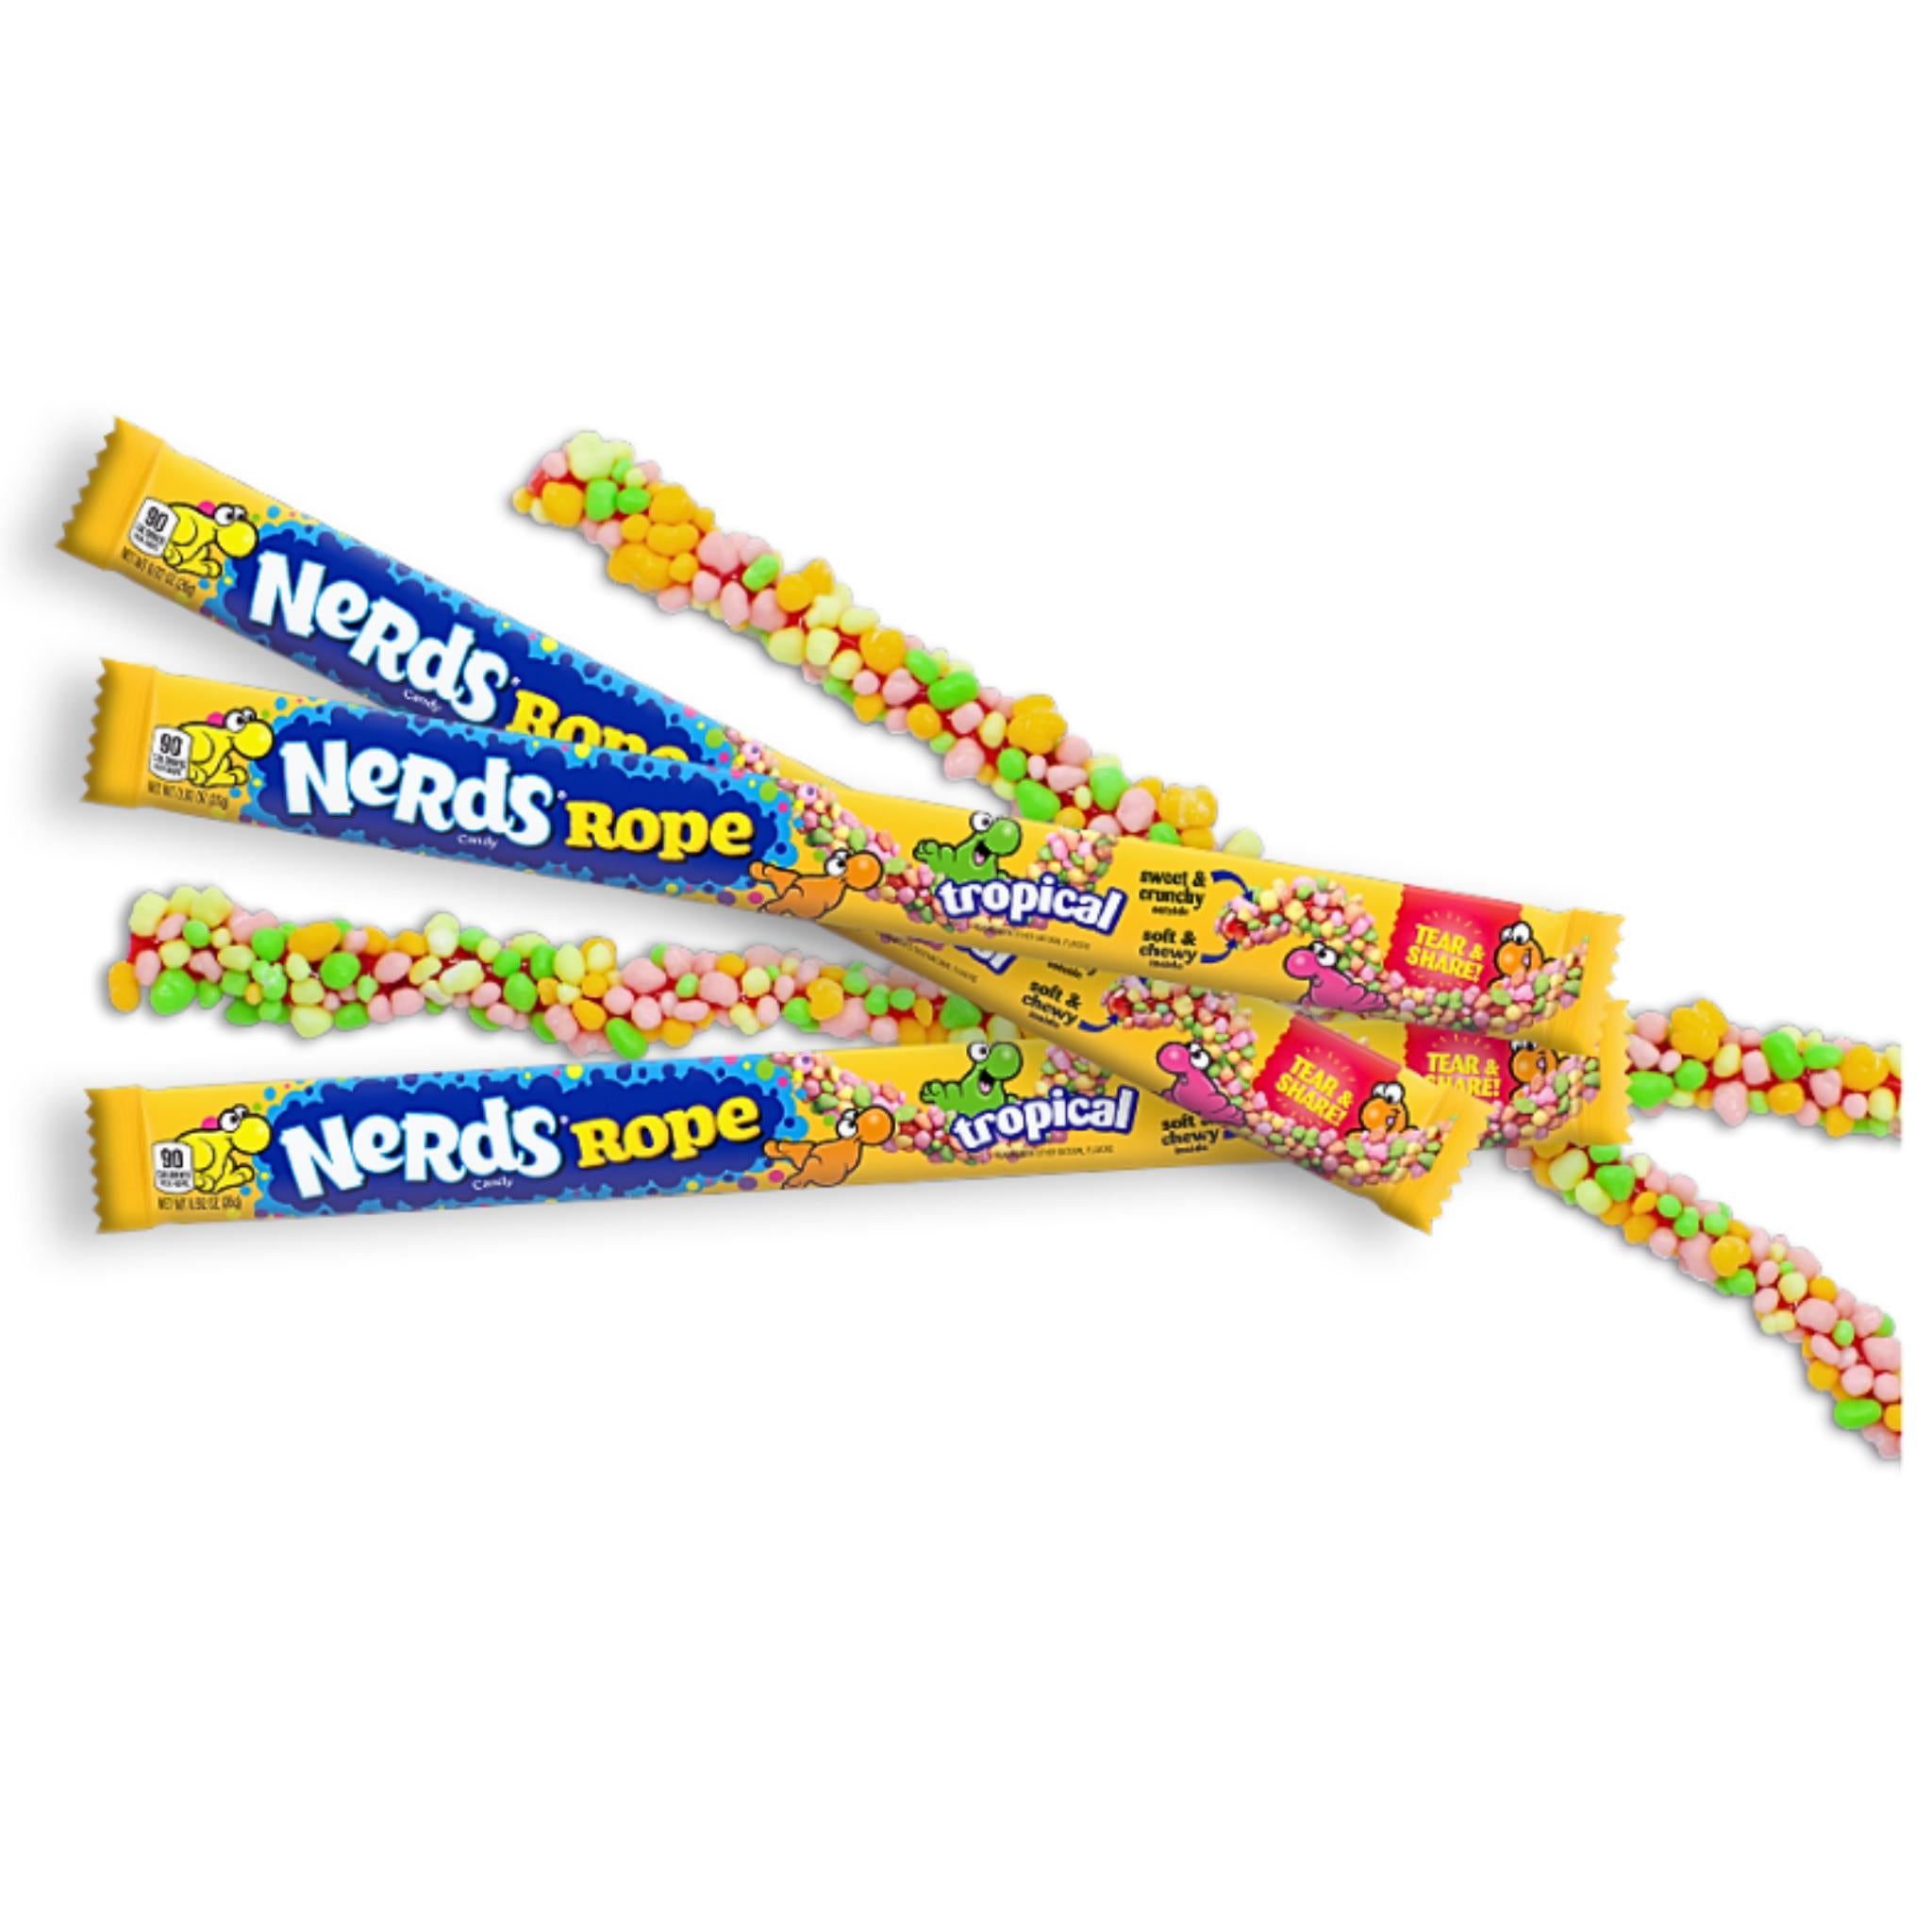 Nerds Rope Tropical - 26g